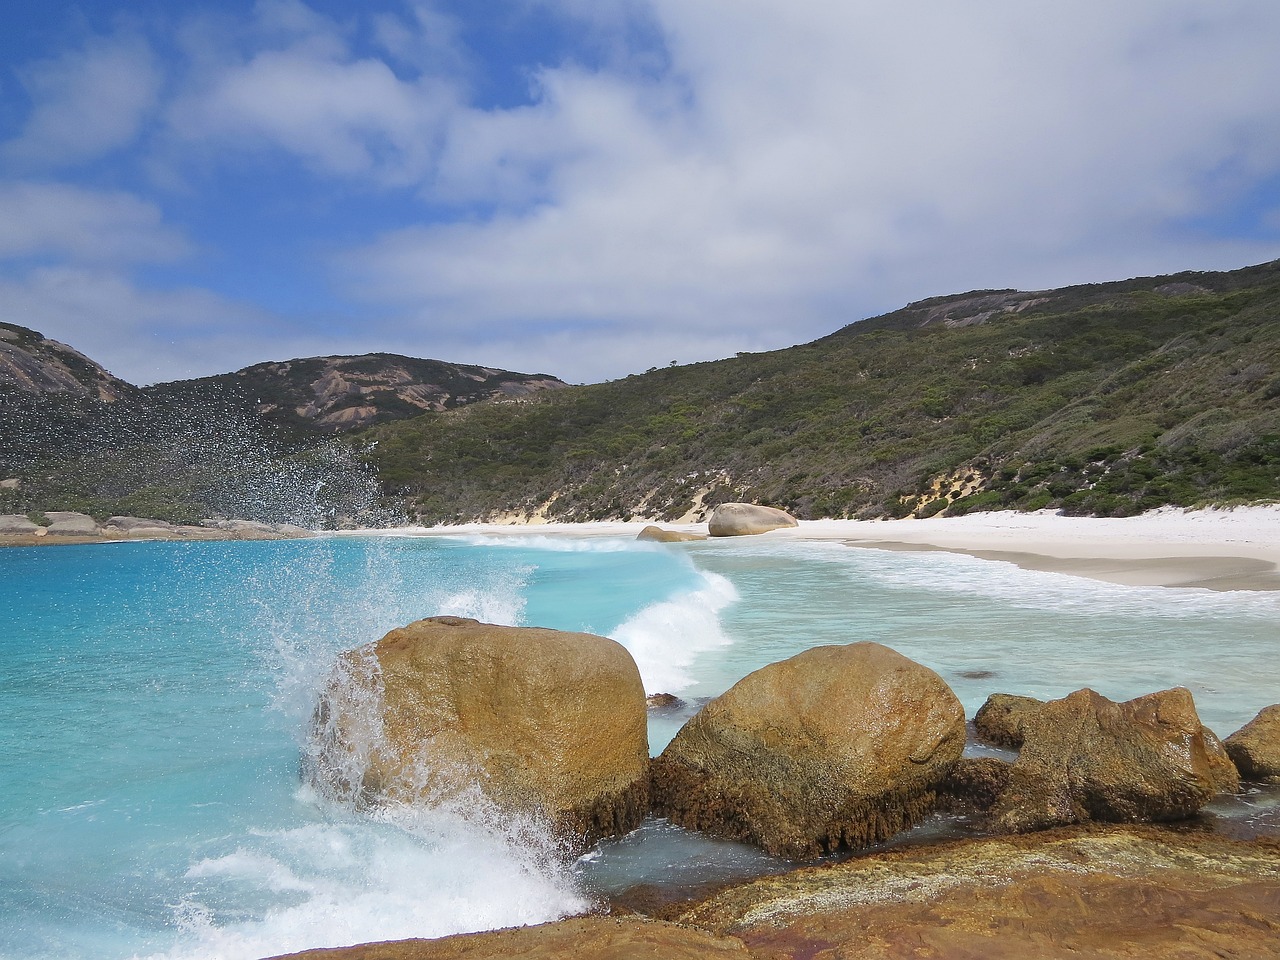 Adventure and Culture in Albany, Bremer Bay, Hopetoun, and Esperance